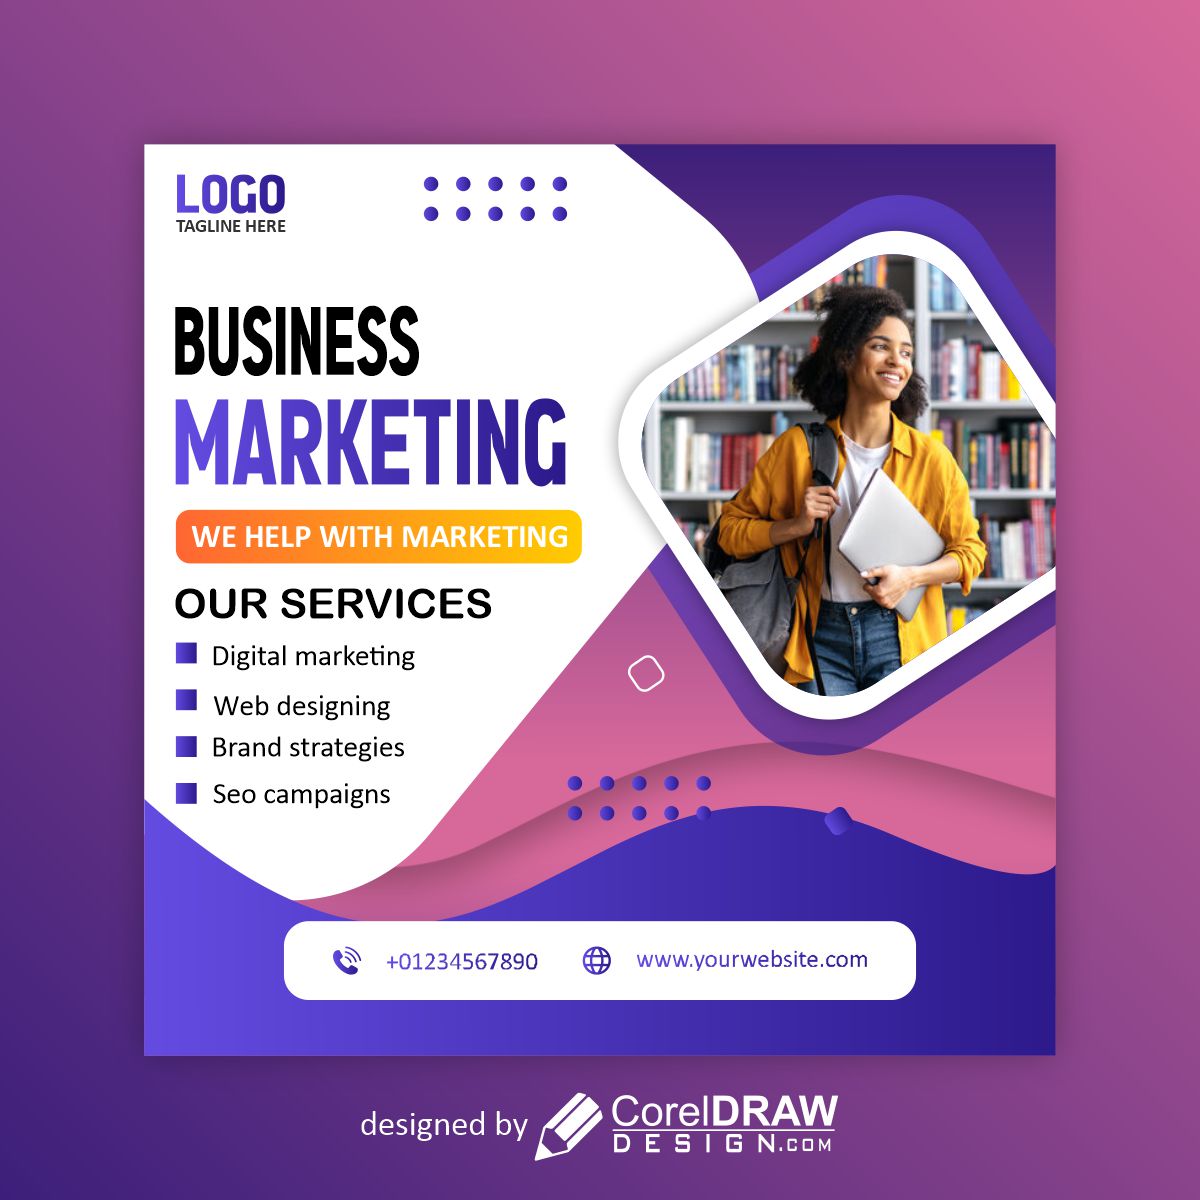 Preview Business Marketing Poster Design For Free 1673357415 